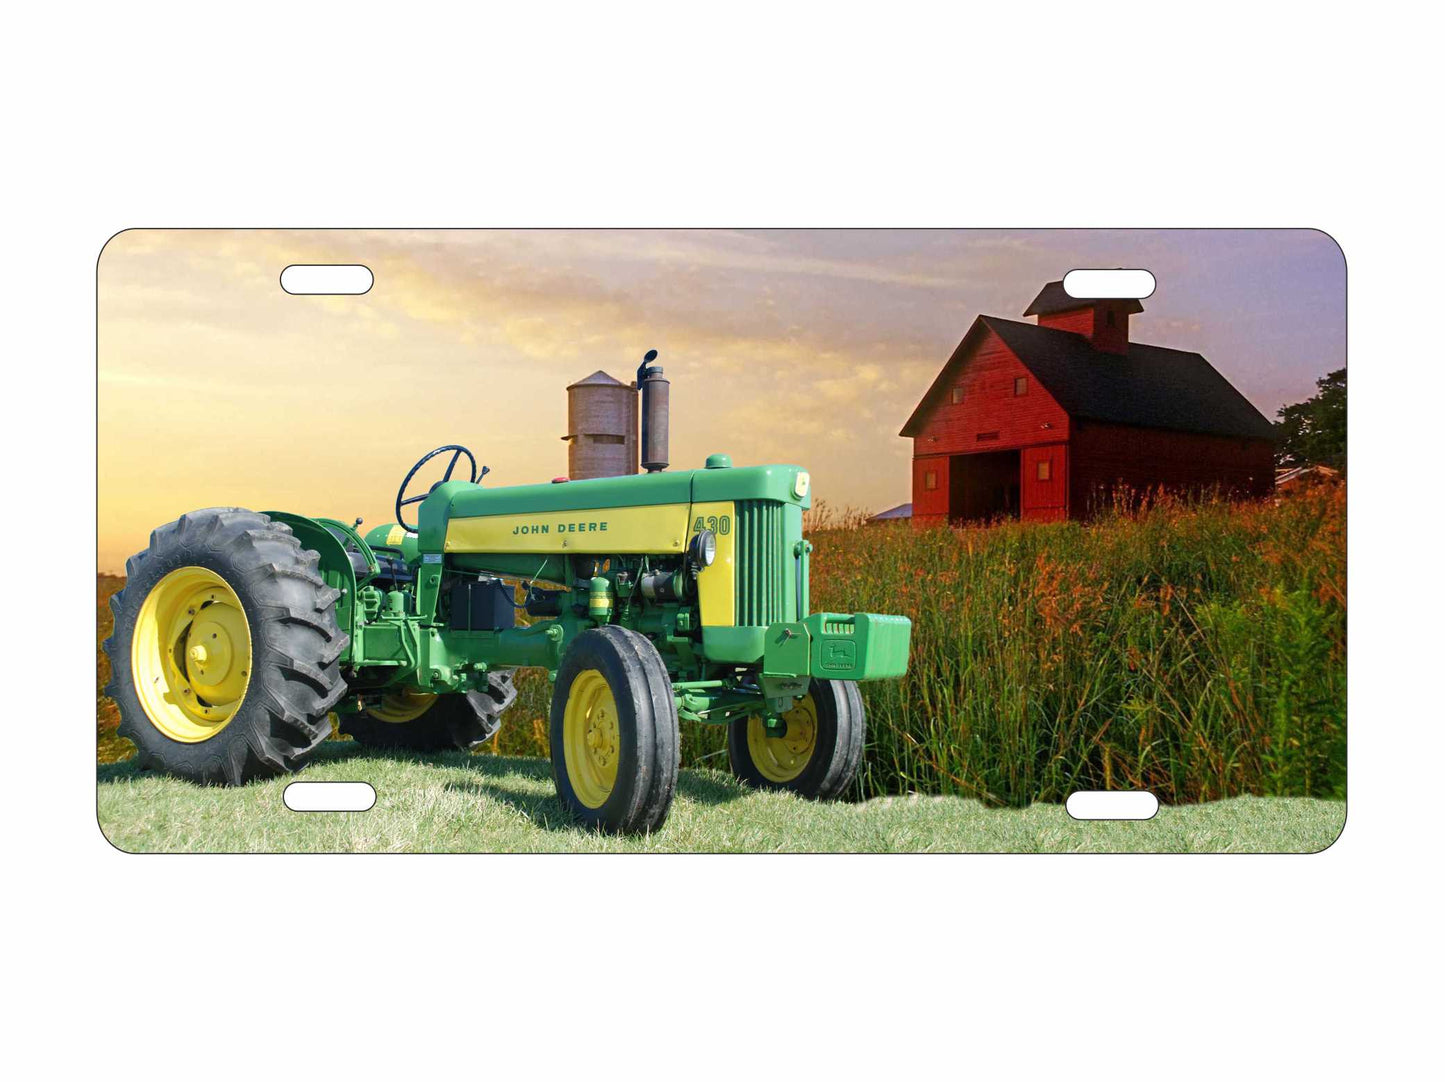 Green Tractor personalized novelty front license plate farm life decorative car tag